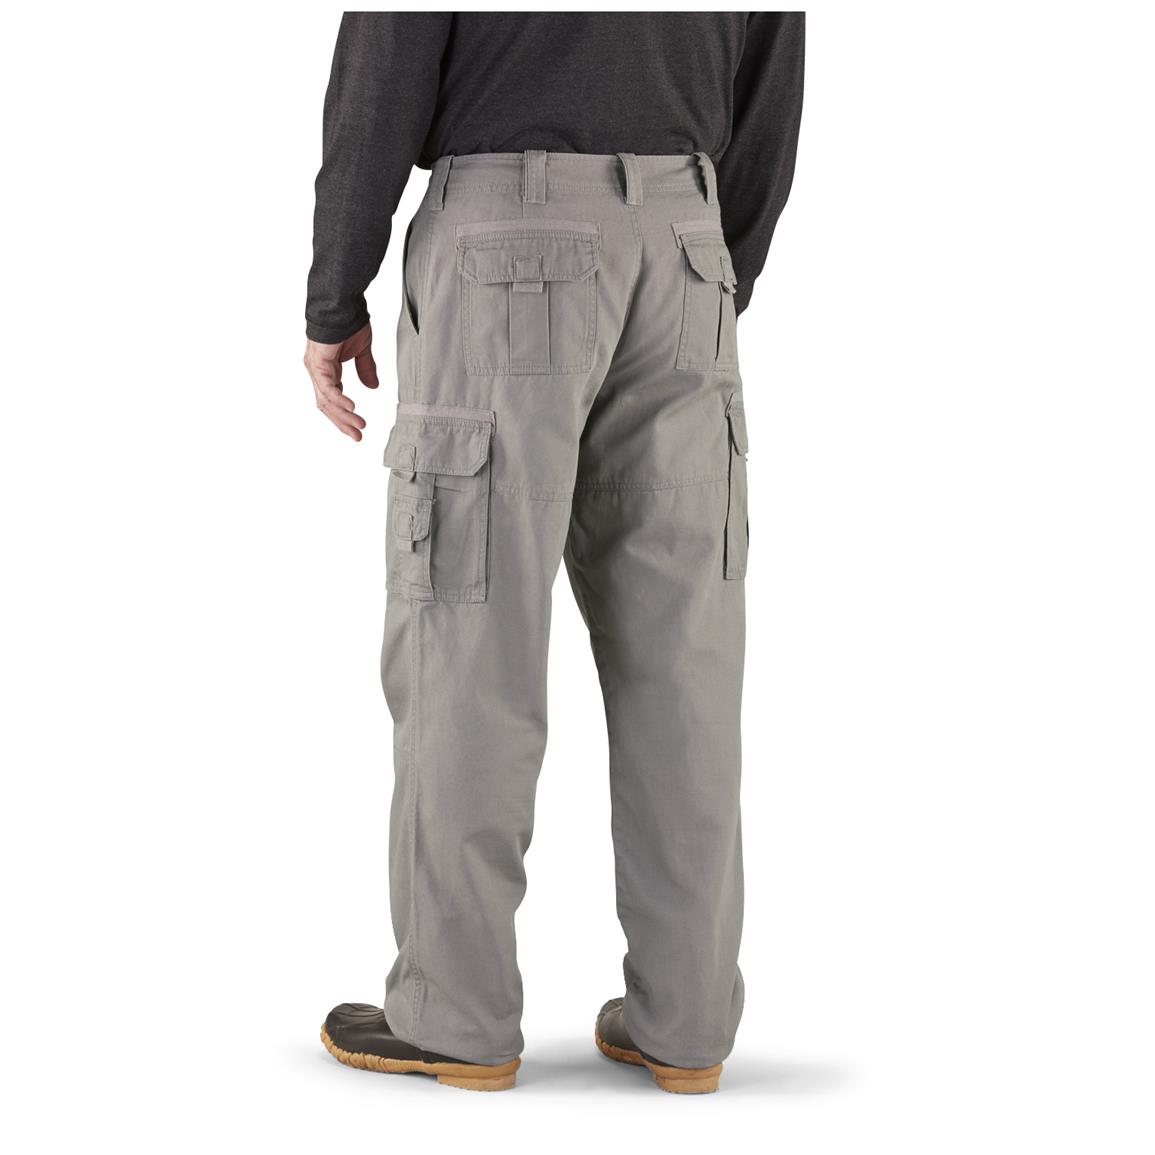 Guide Gear Men's Cargo Pants, Flannel Lined - 224165, Insulated Pants ...